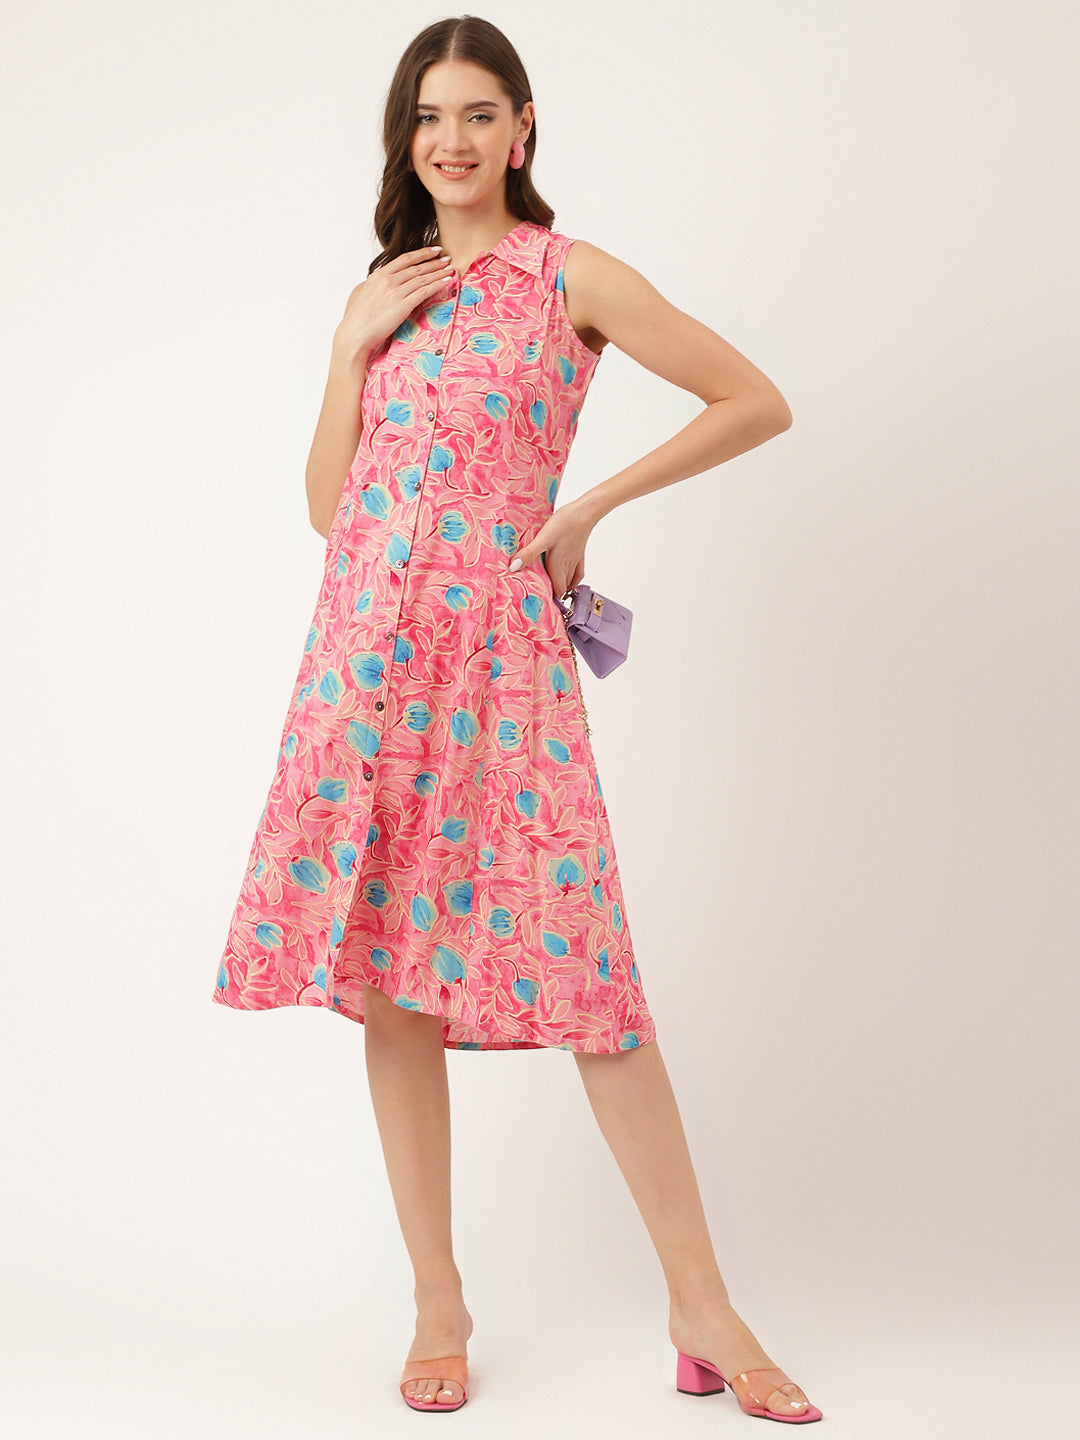 Divena Pink Floral Print Rayon A-Line Midi Dress with Attached Sleeves for Women